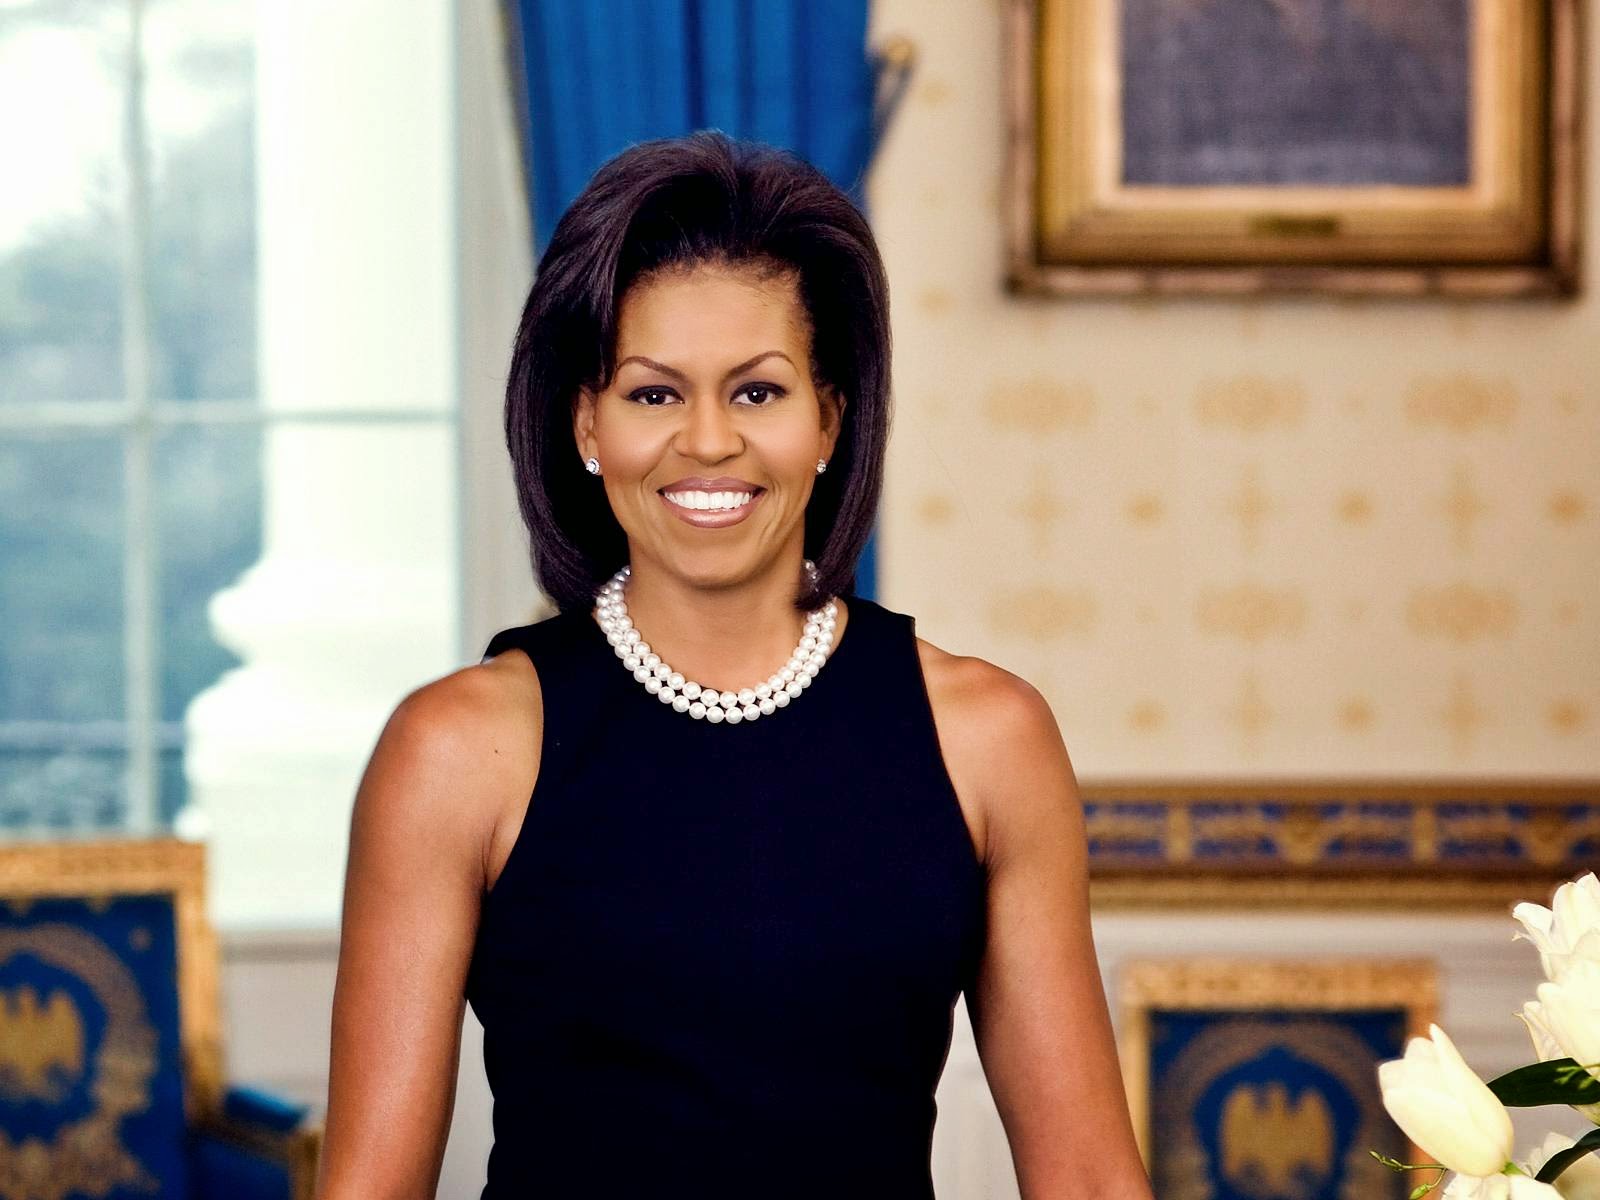 Michelle Obama Biography And Photograph Wallpaper HD Top Artis